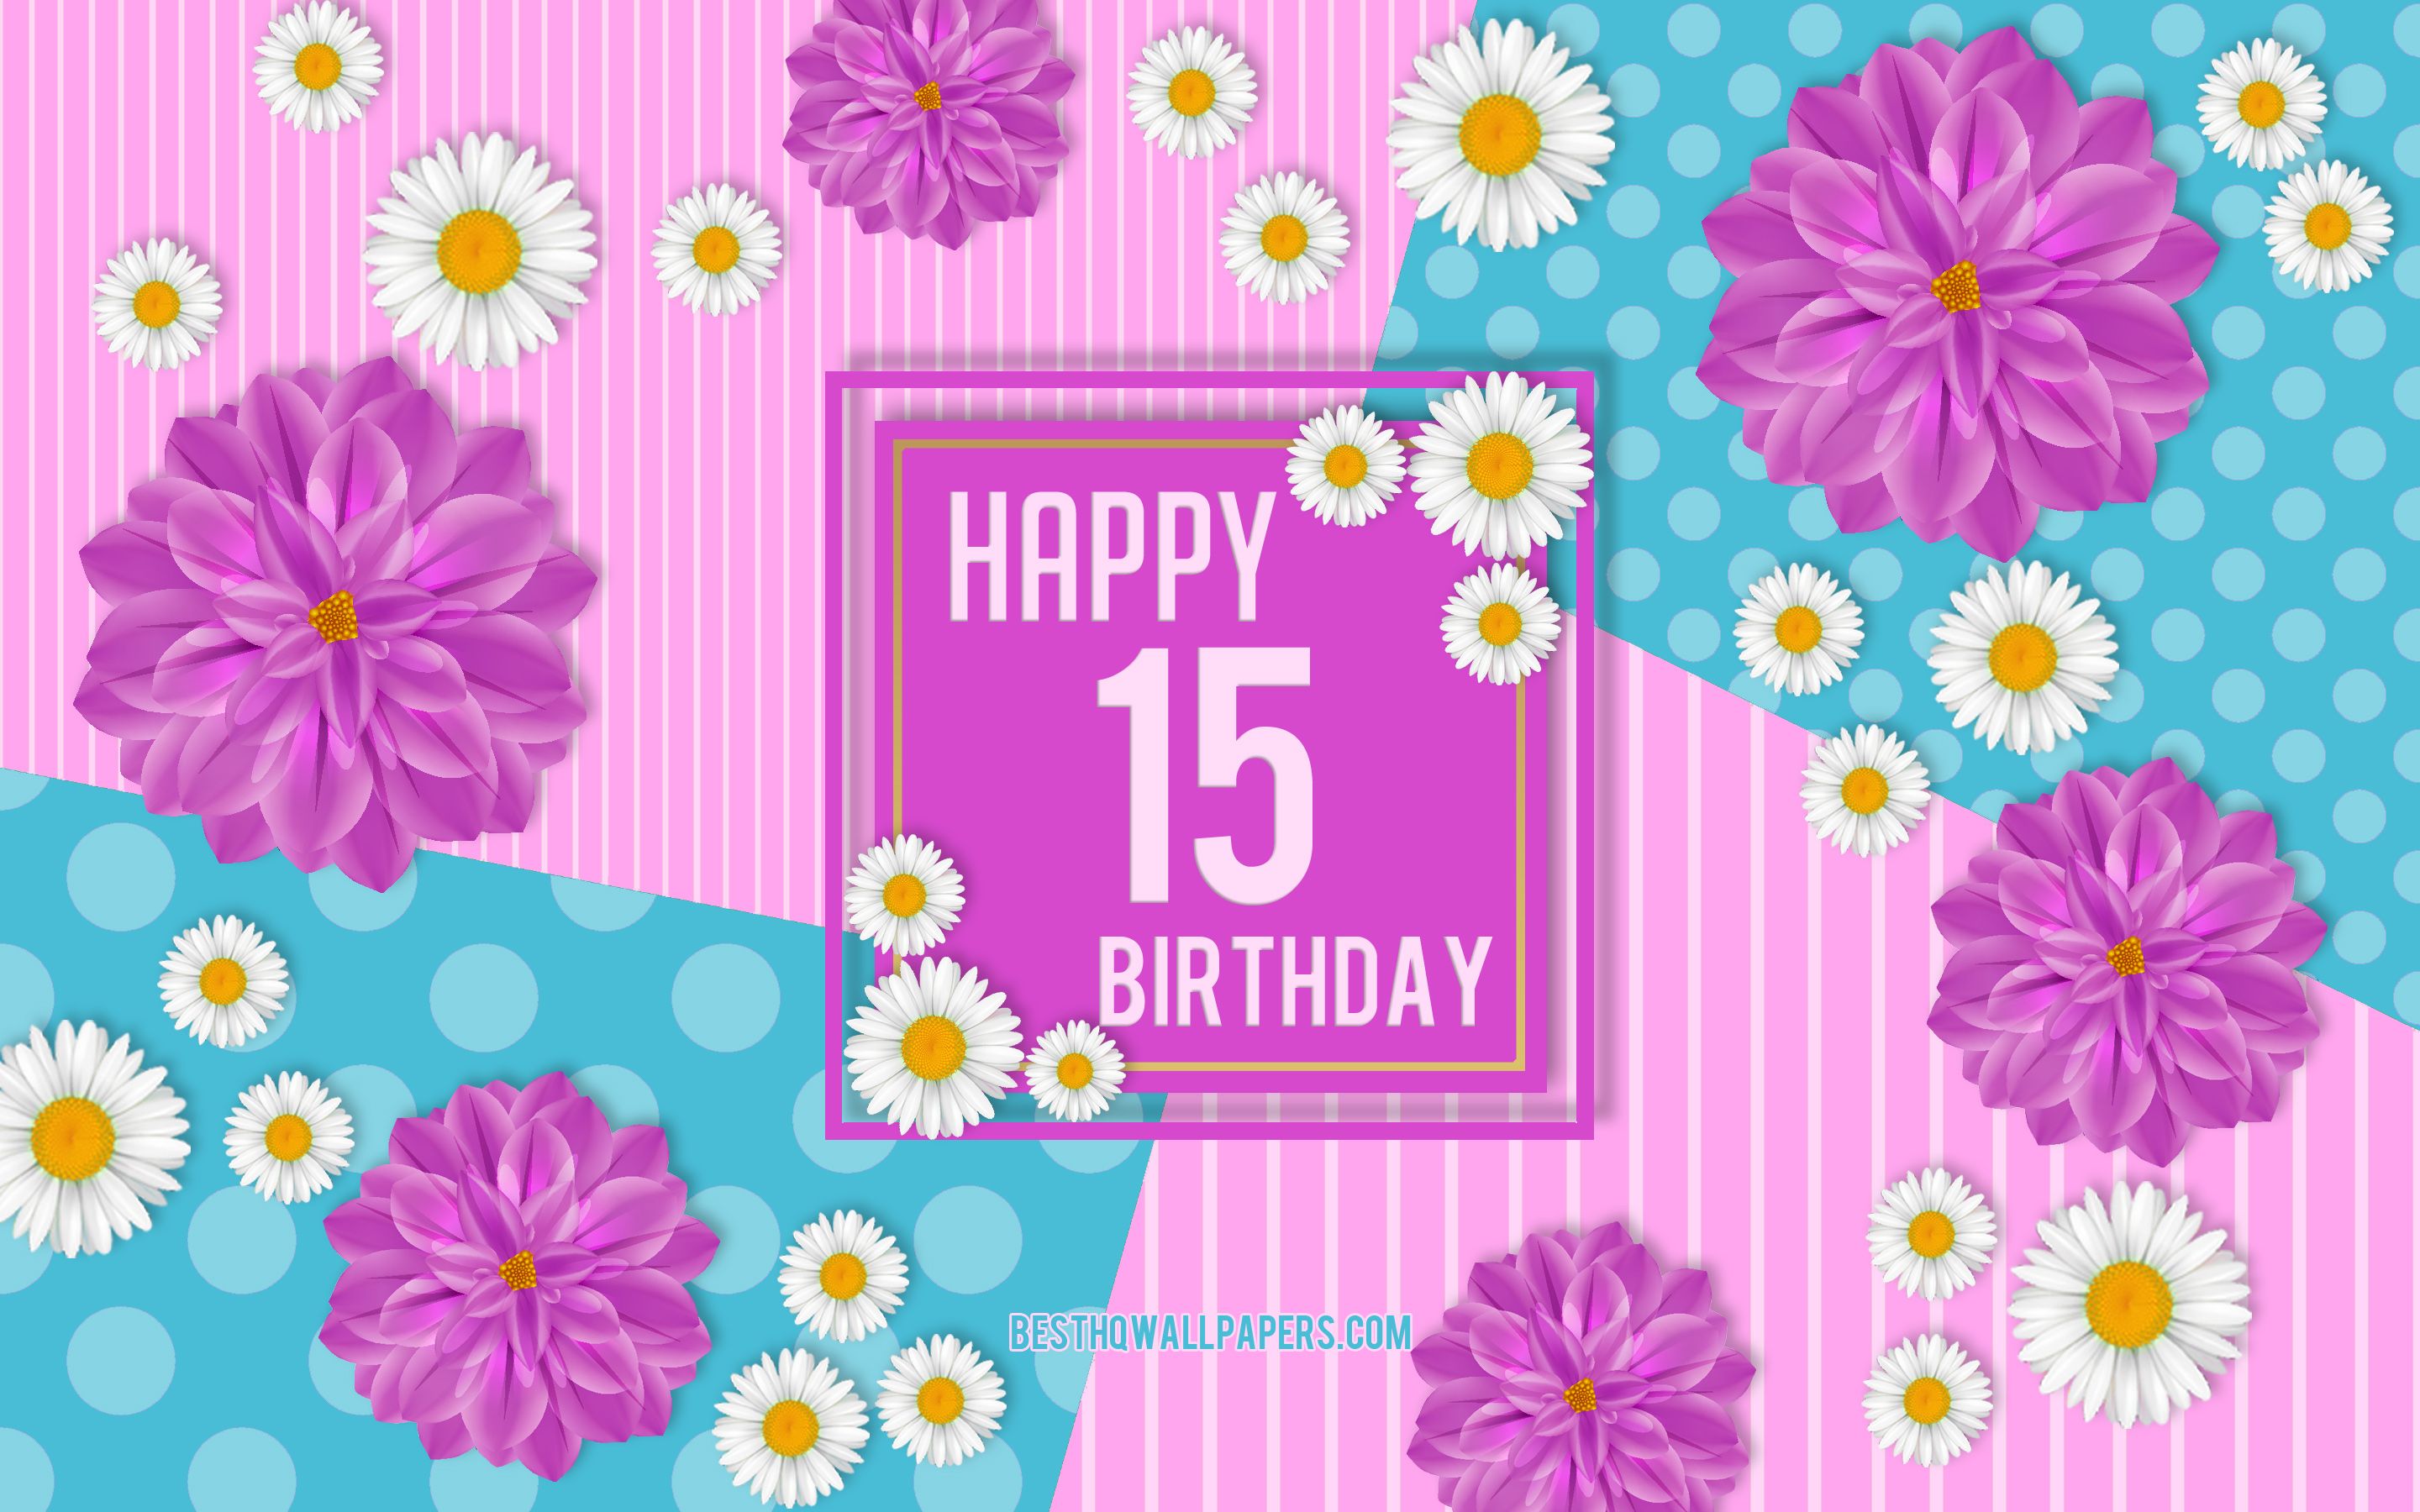 Download wallpaper 15th Happy Birthday, Spring Birthday Background, Happy 15th Birthday, Happy 15 Years Birthday, Birthday flowers background, 15 Years Birthday, 15 Years Birthday party for desktop with resolution 2880x1800. High Quality